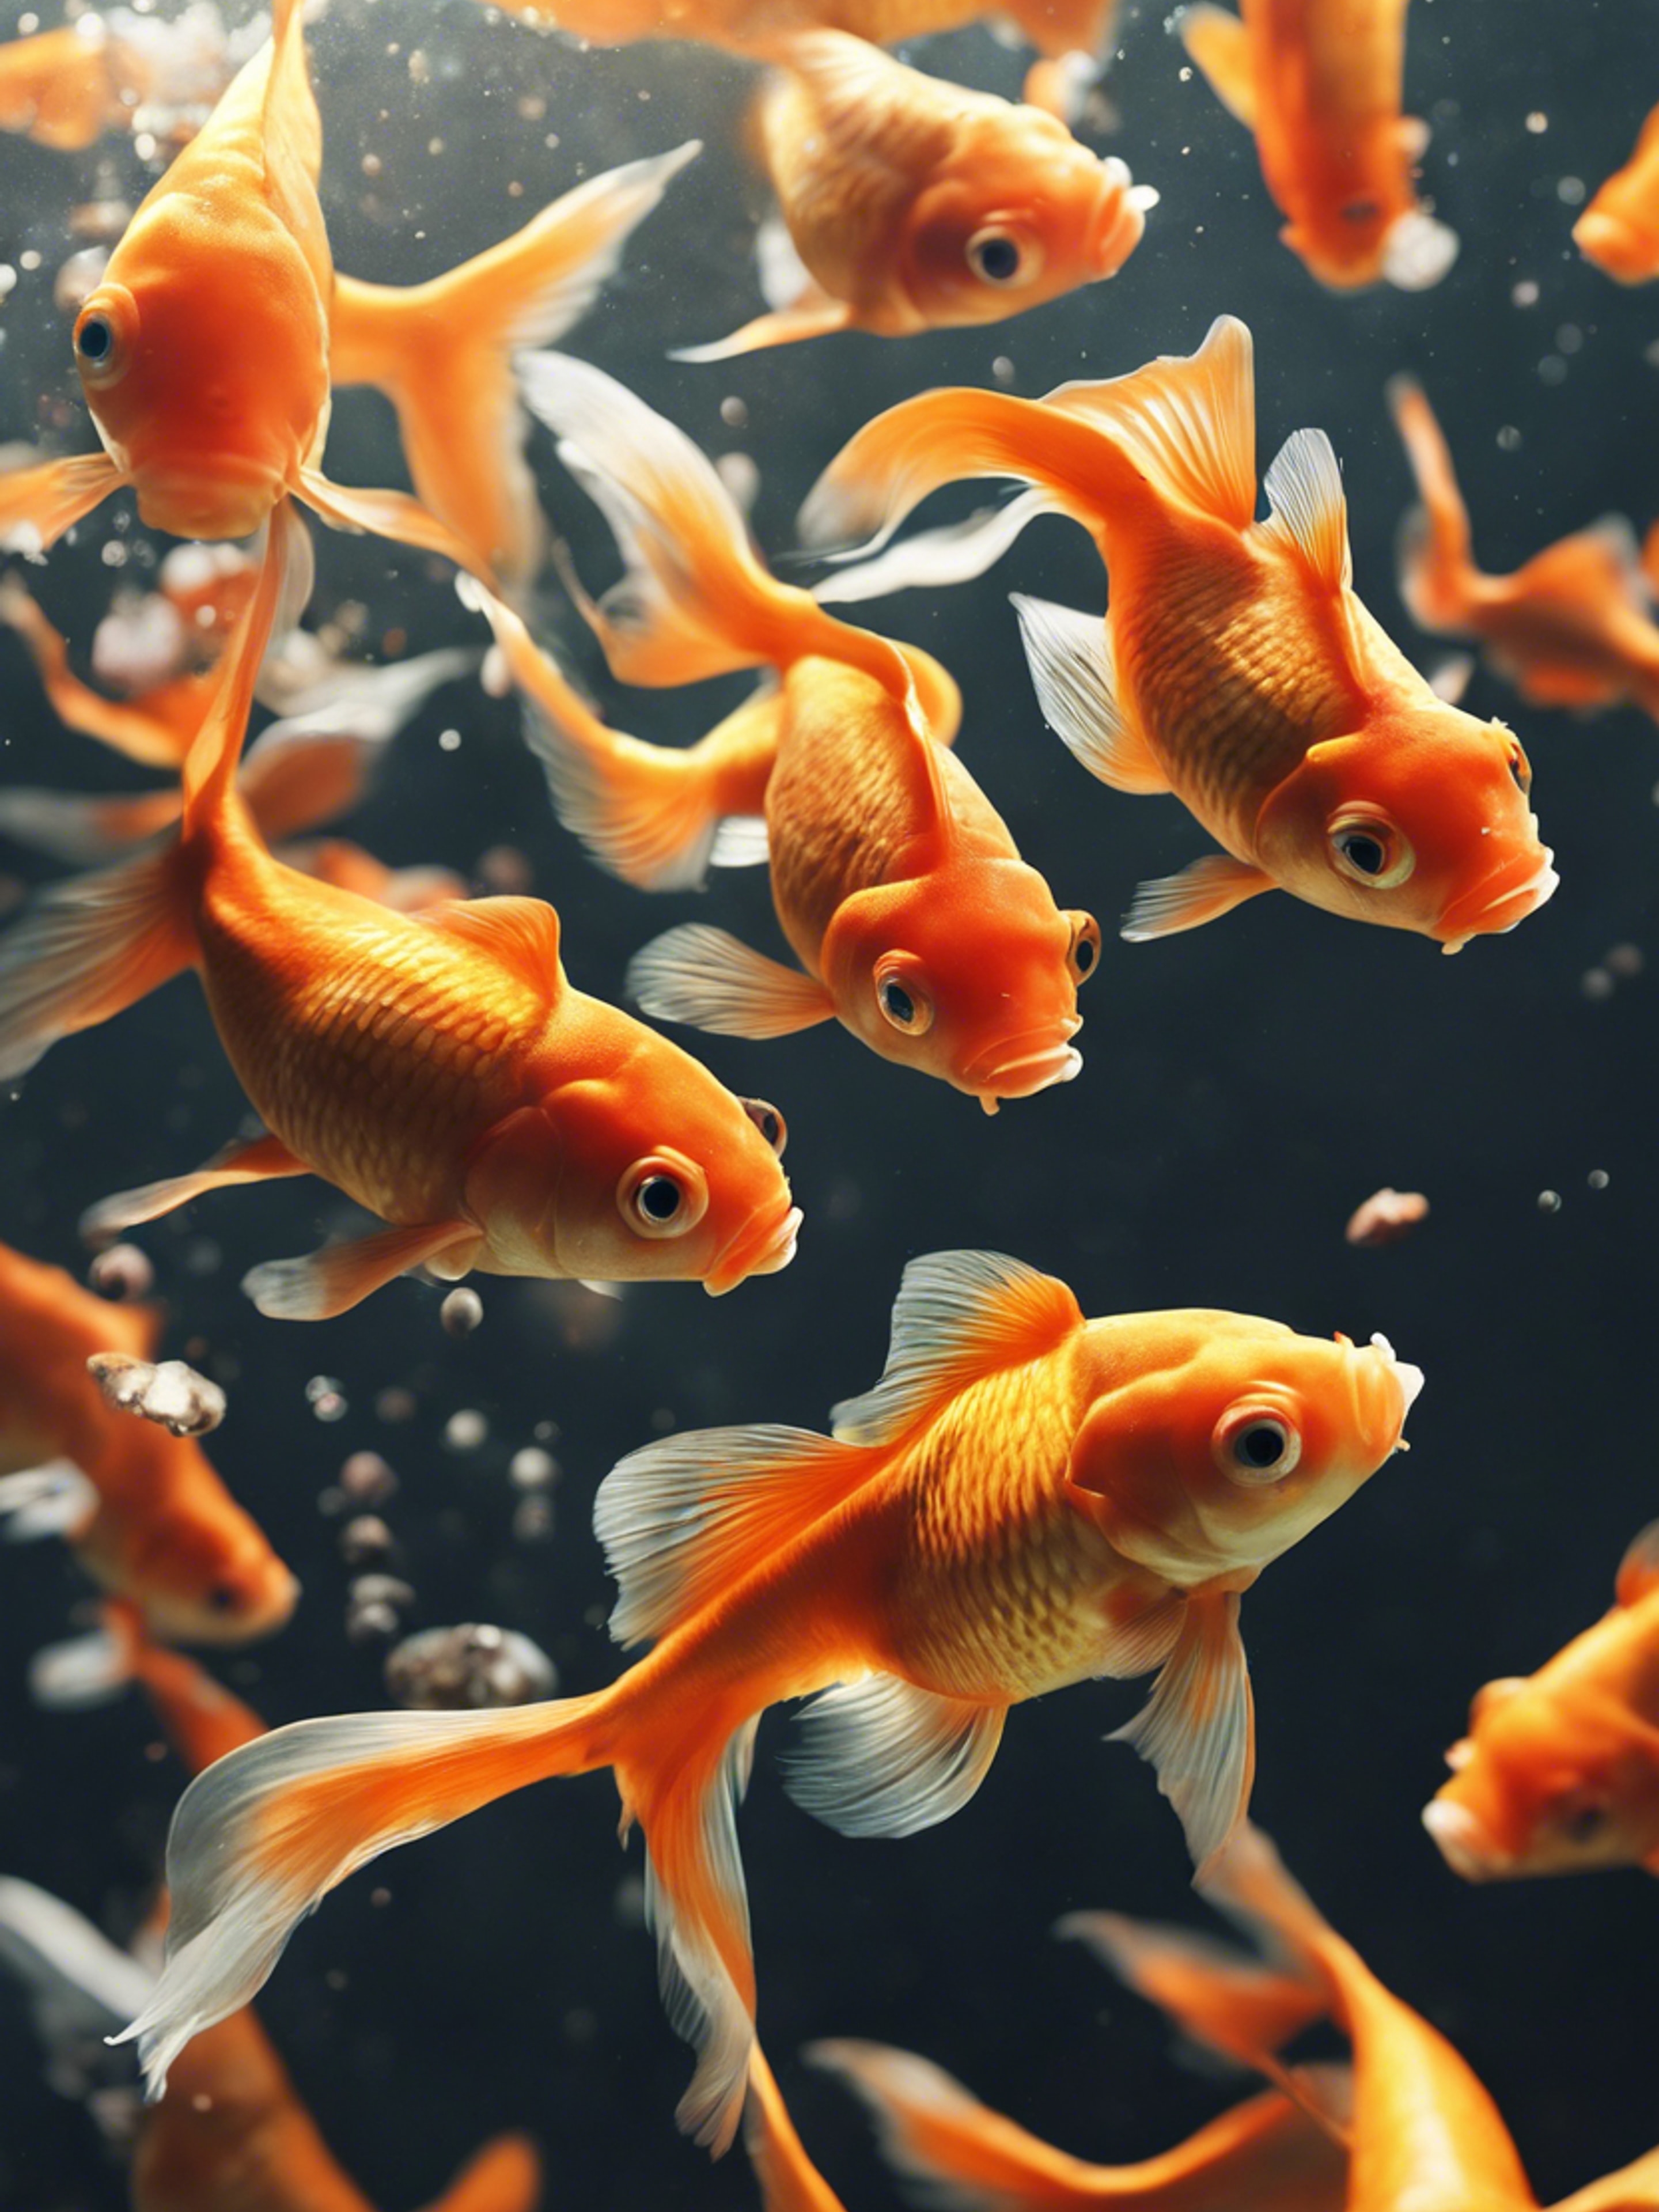 A group of goldfish gathered together feeding on floating fish food in a pond. Sfondo[884d4a7ab78e48ae91a0]